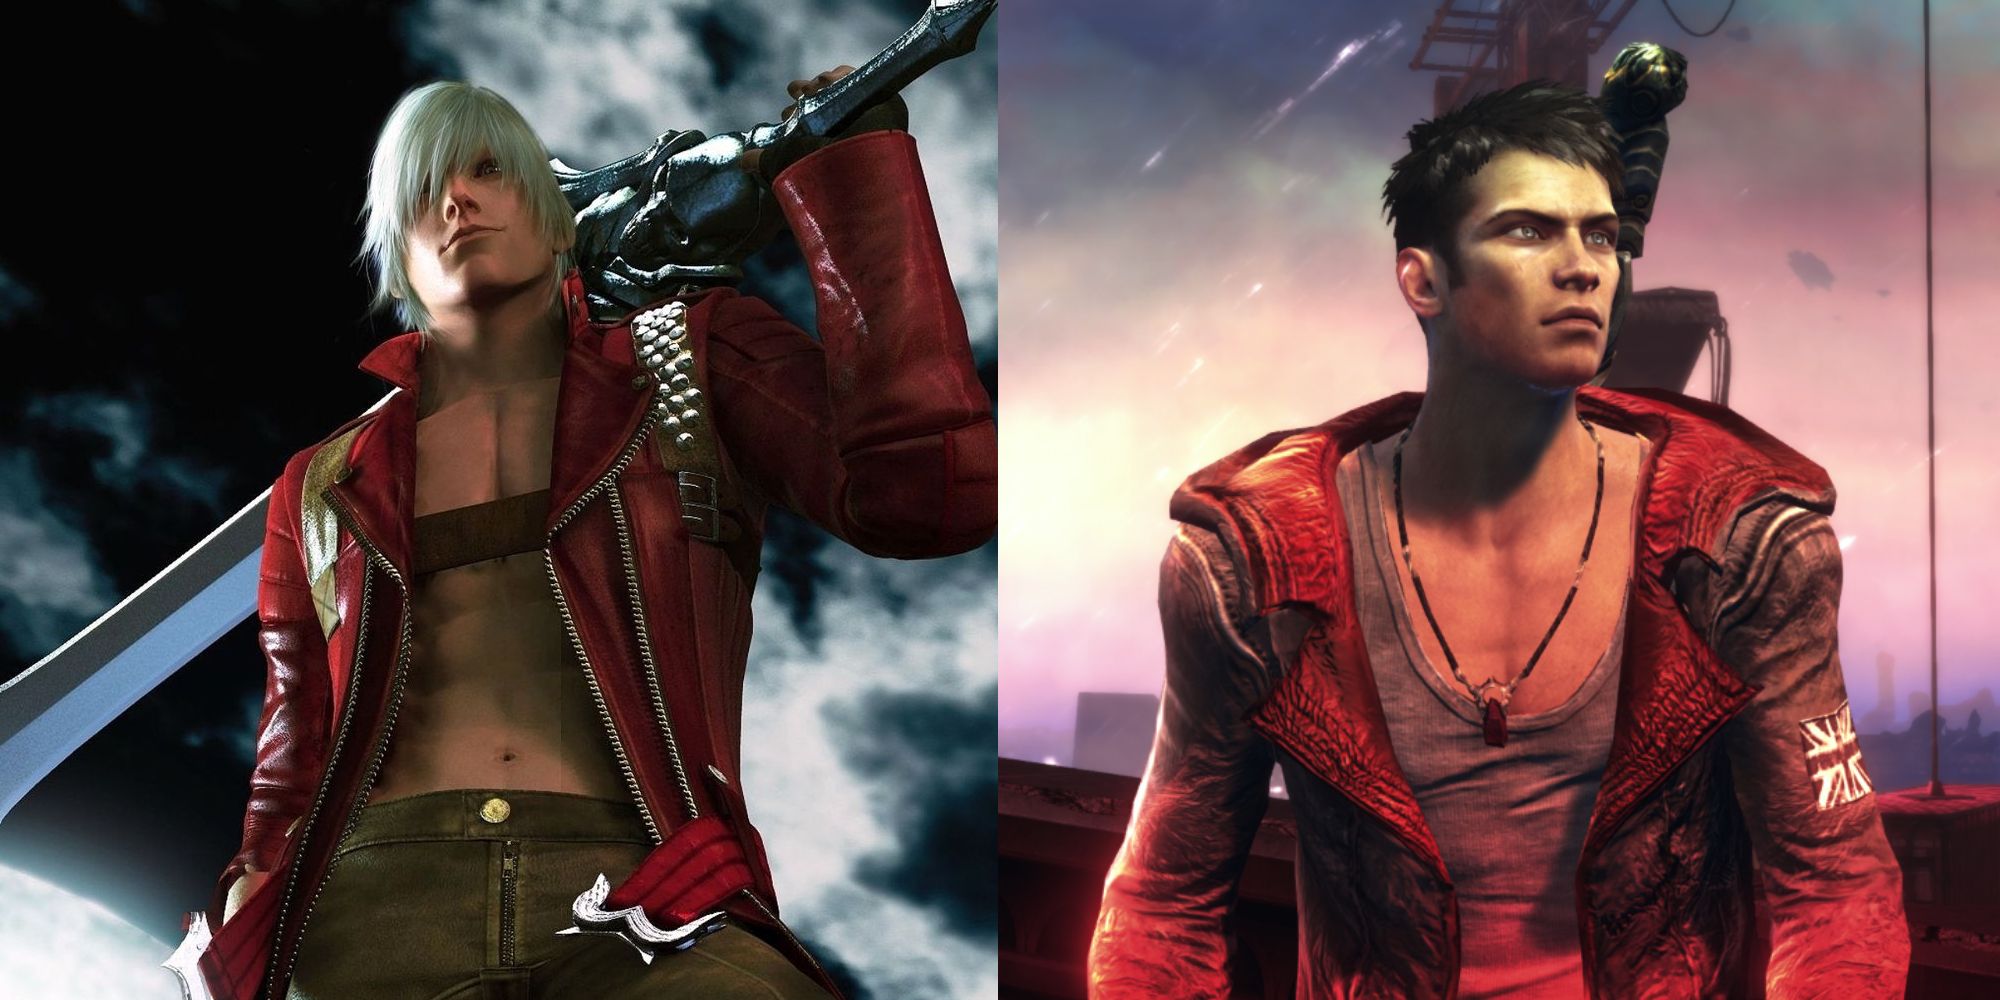 A side-by-side comparison of Dante's silver-haired, leather-clad appearance in Devil May Cry, and his black-haired, slouchy redesign in DmC: Devil May Cry